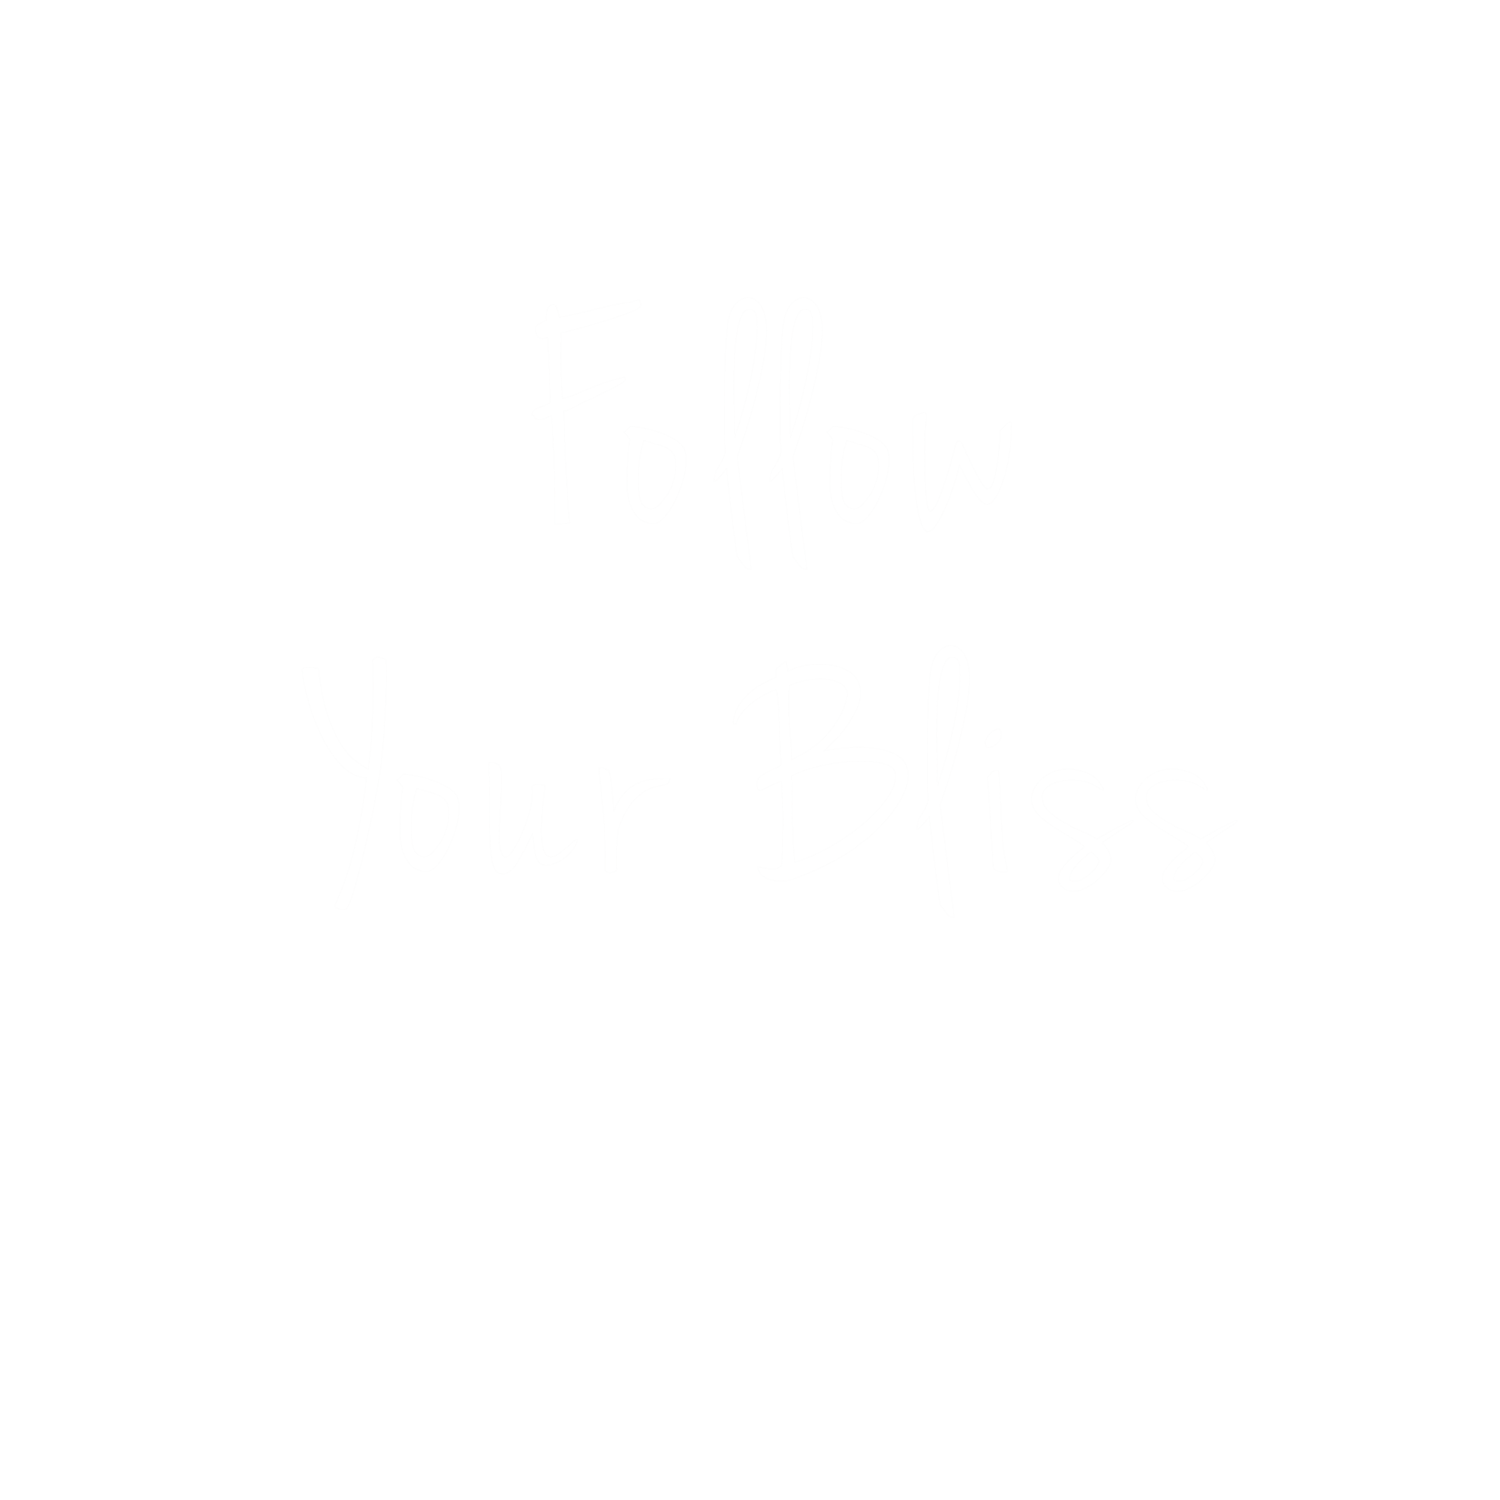 Follow Your Bliss Essentials